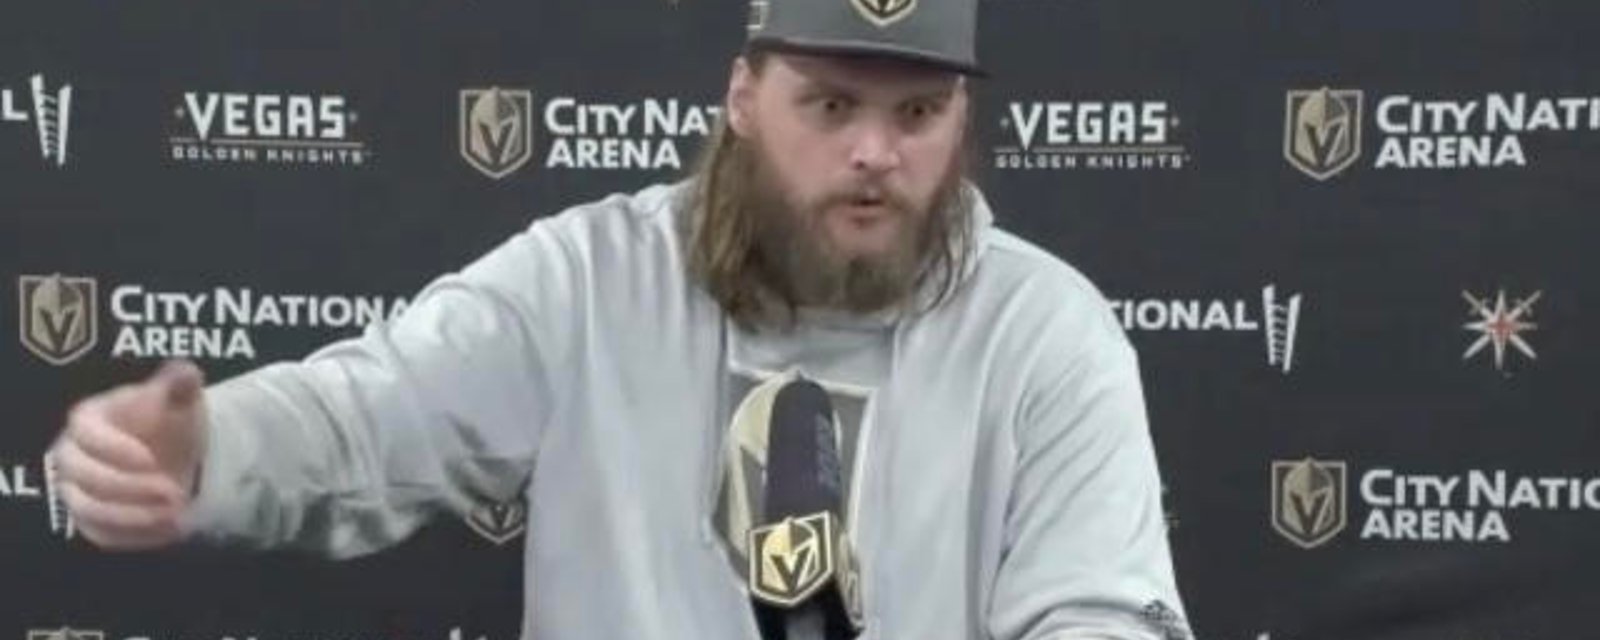 Robin Lehner was lied to by the Golden Knights